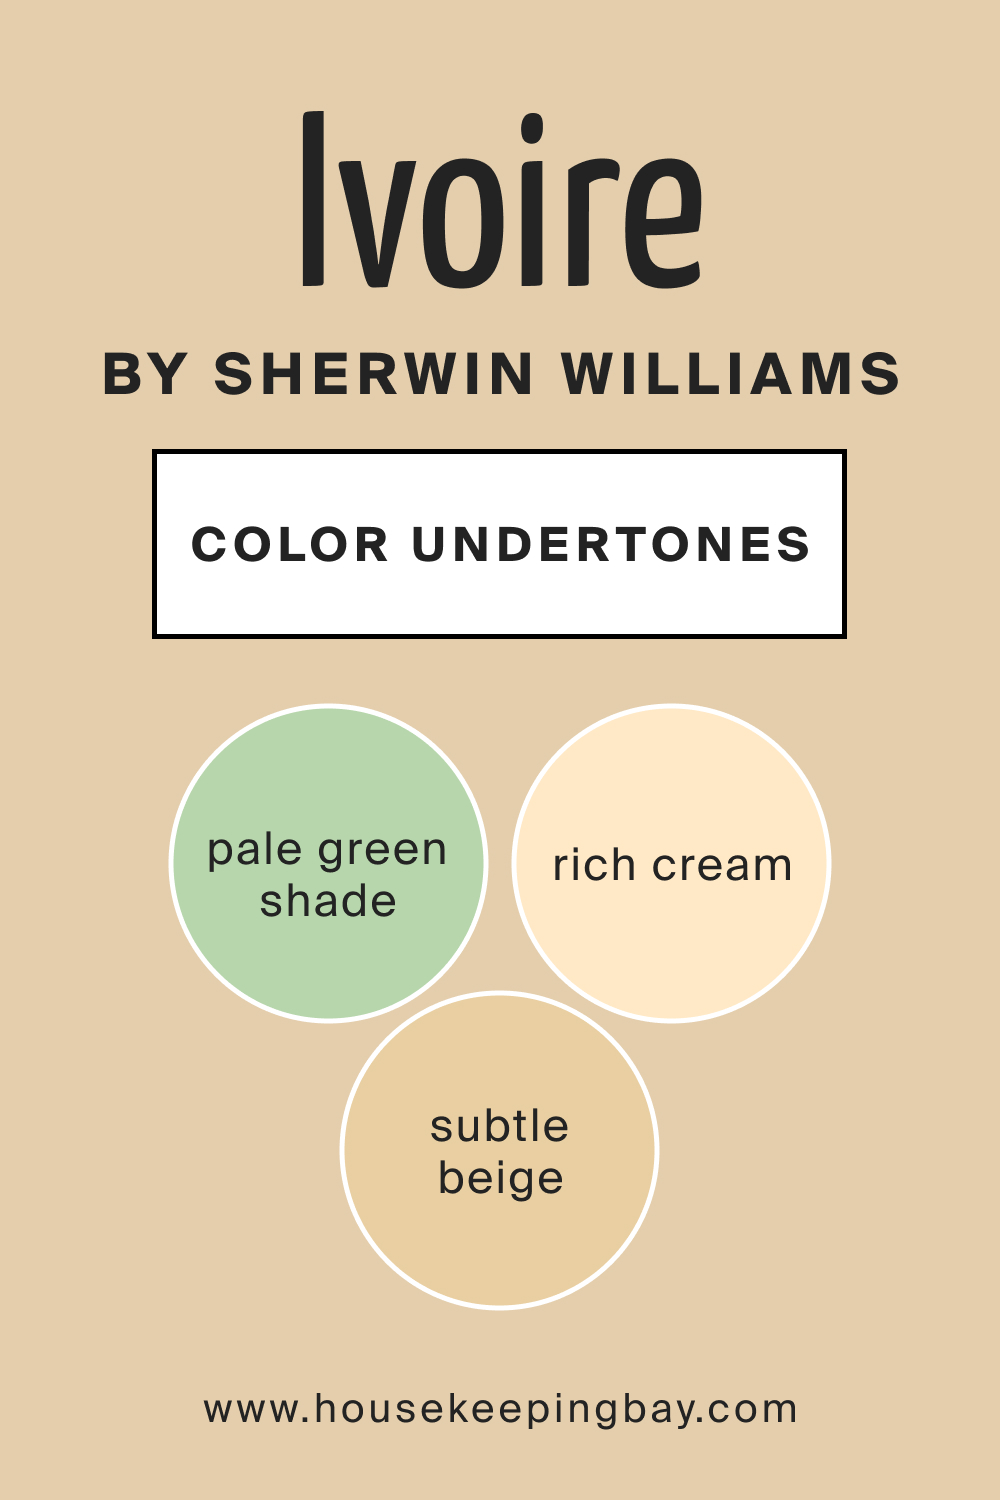 SW Ivoire by Sherwin Williams Main Color Undertone